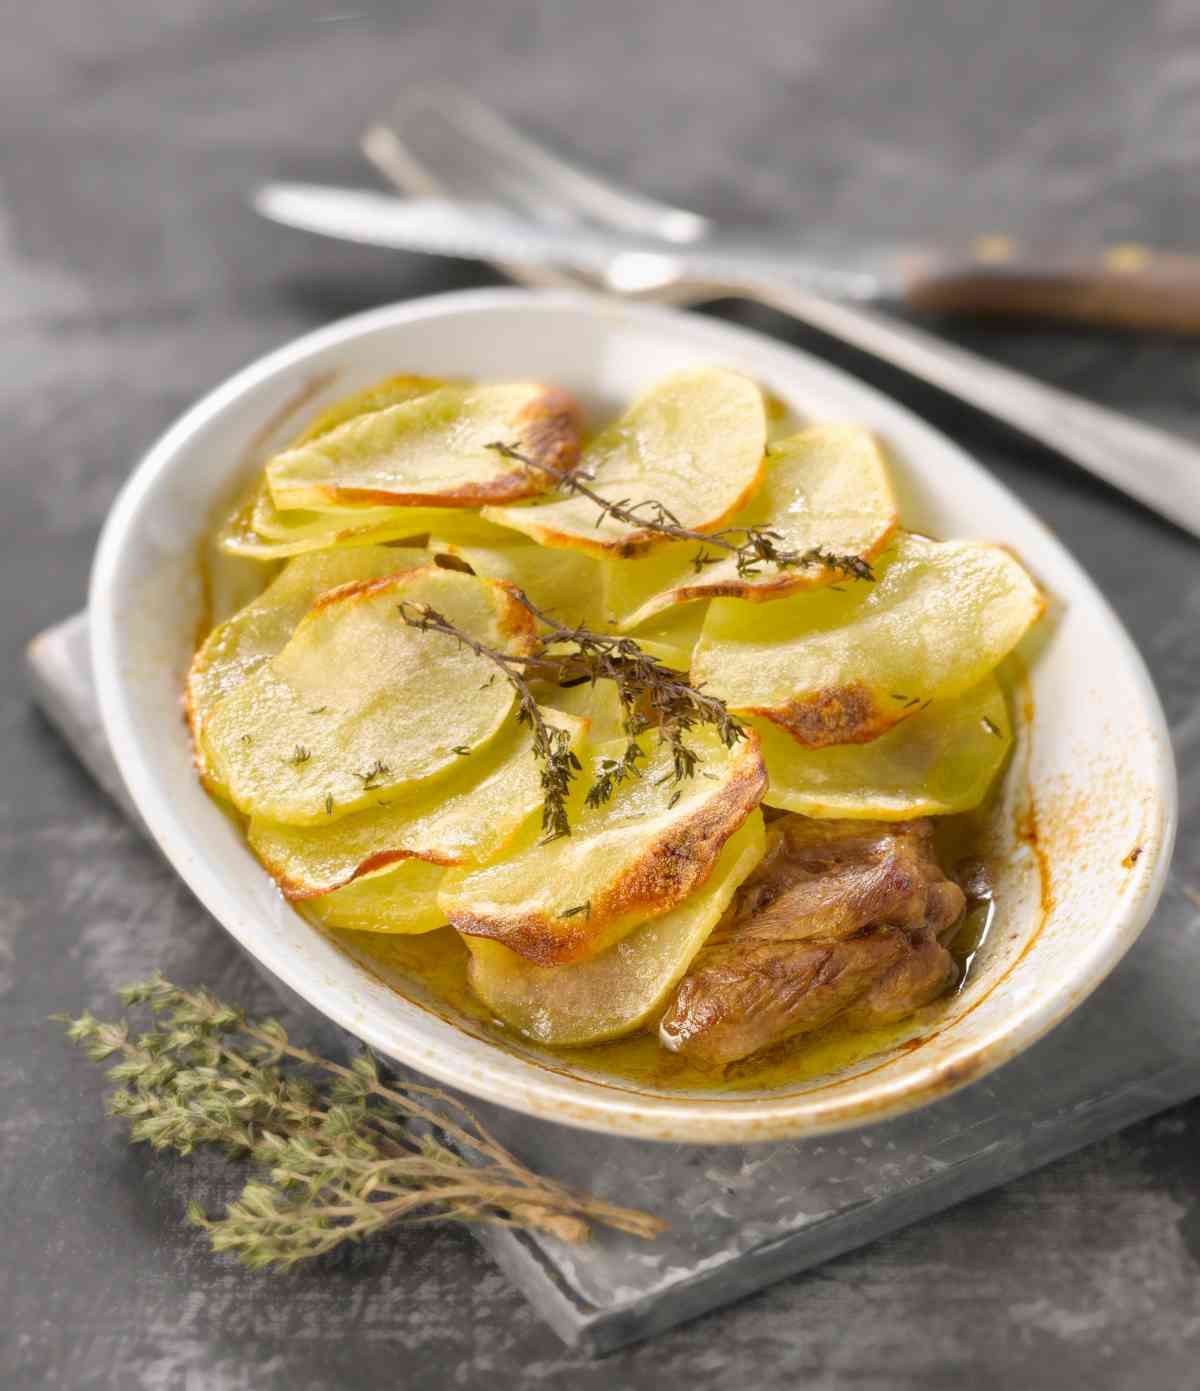 Recipe for lamb fillet with thyme and baked sliced potato